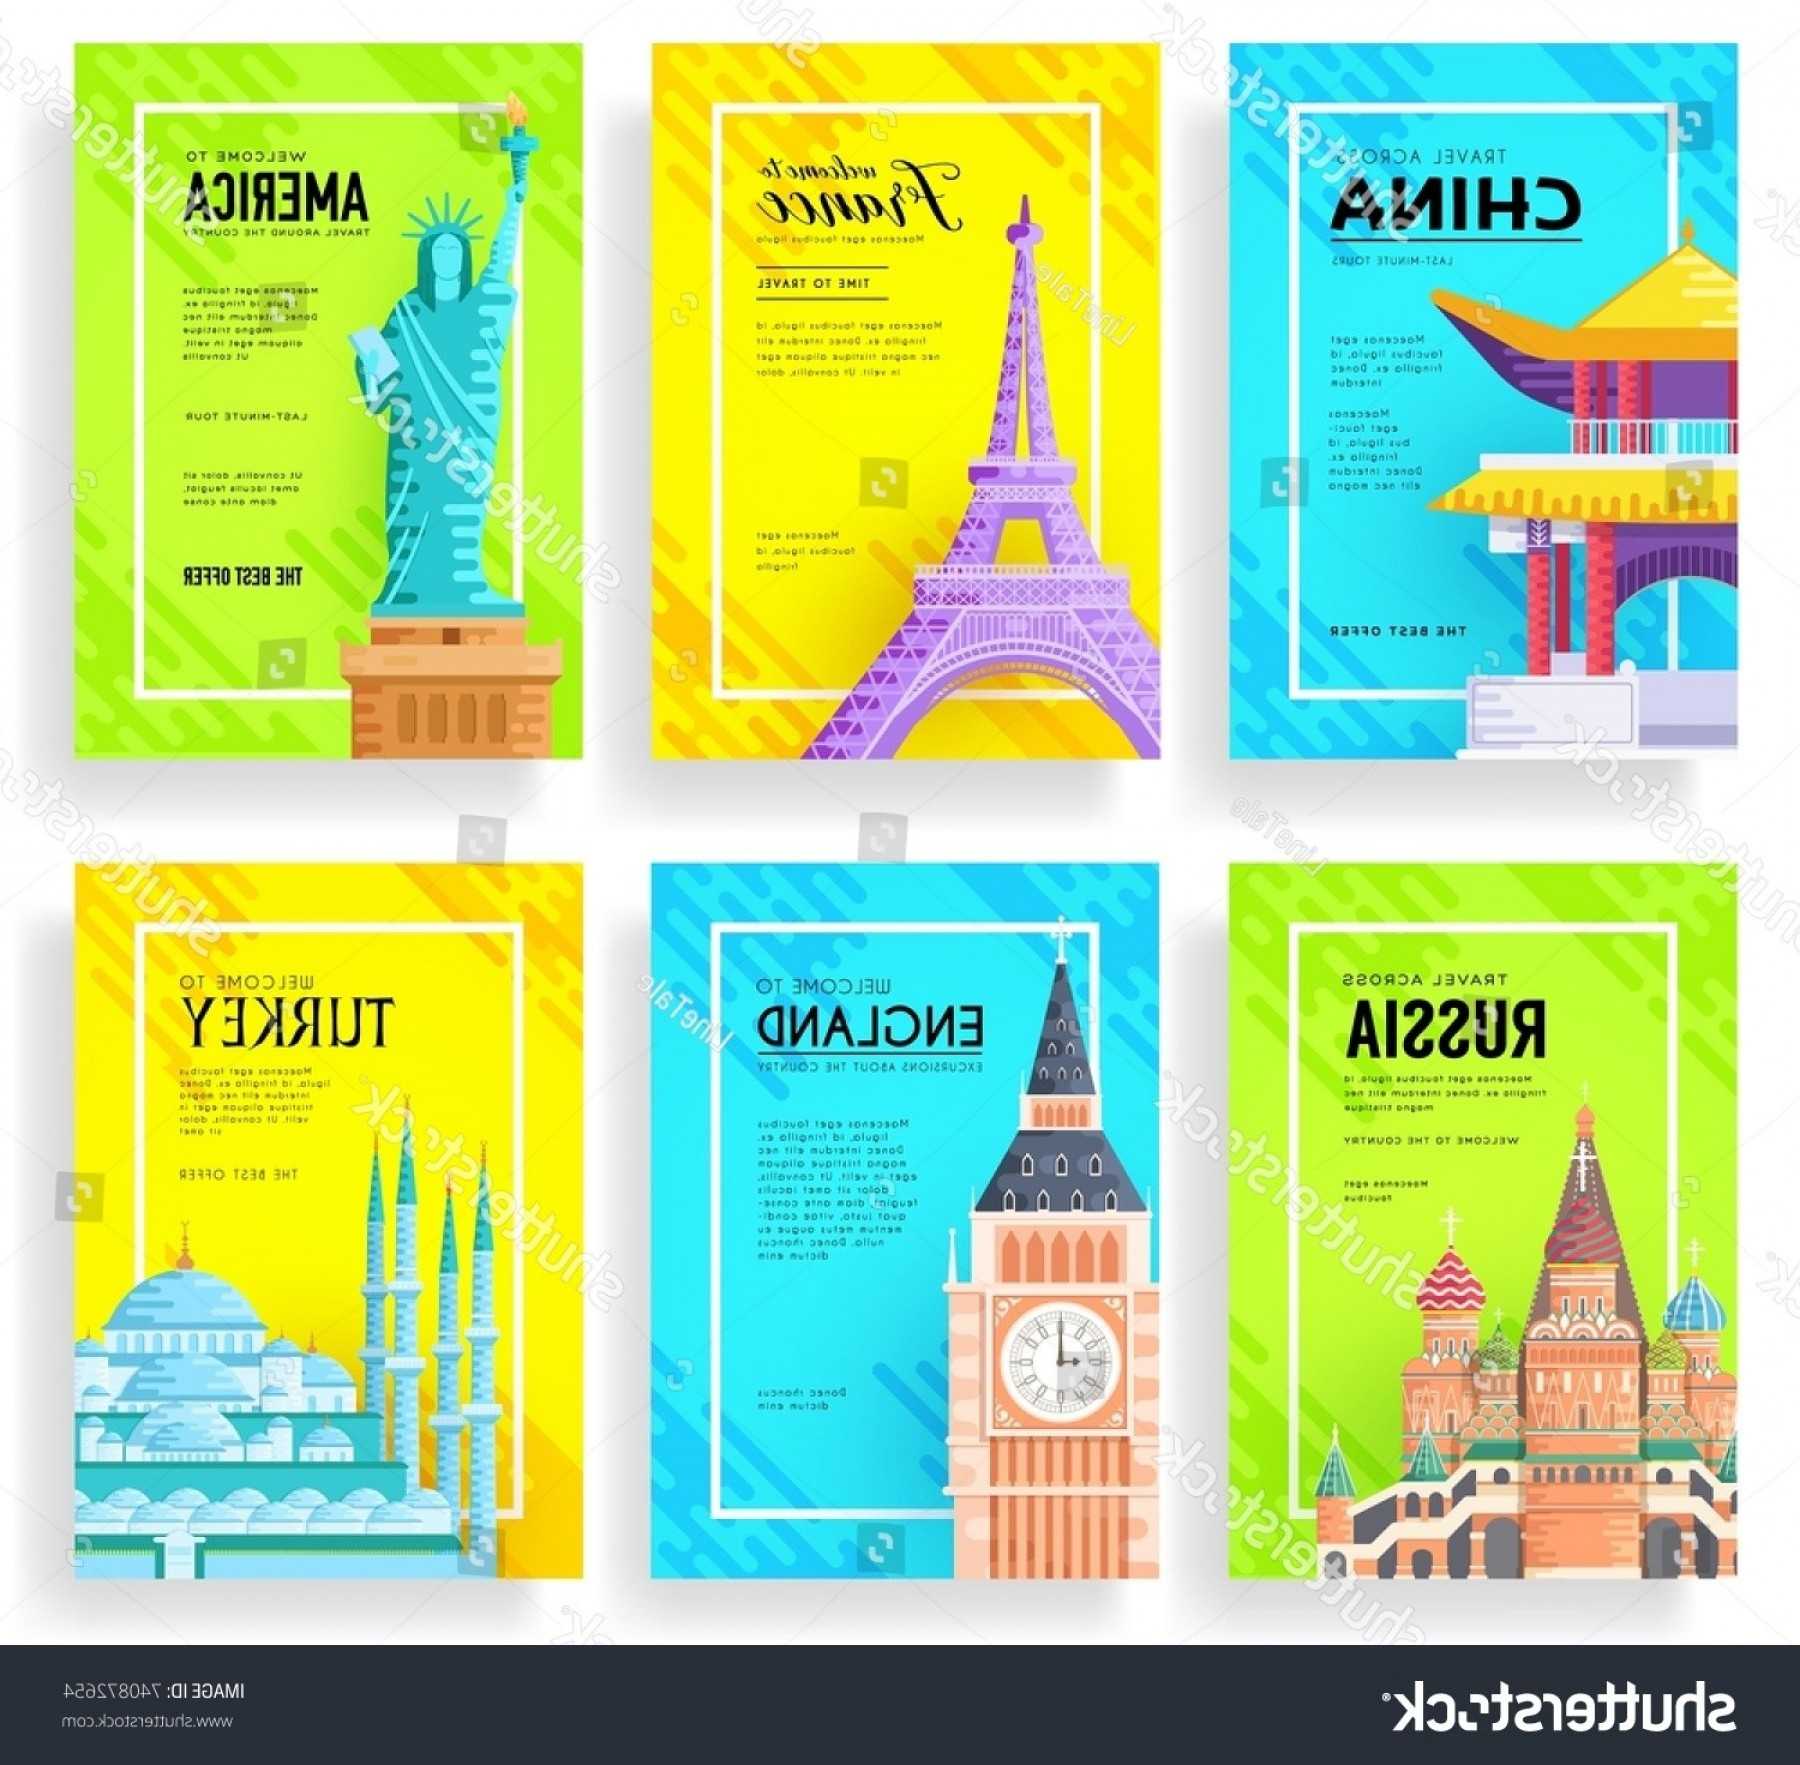 Travel Guide Brochure Template New Travel Flyer Template Regarding Travel Guide Brochure Template